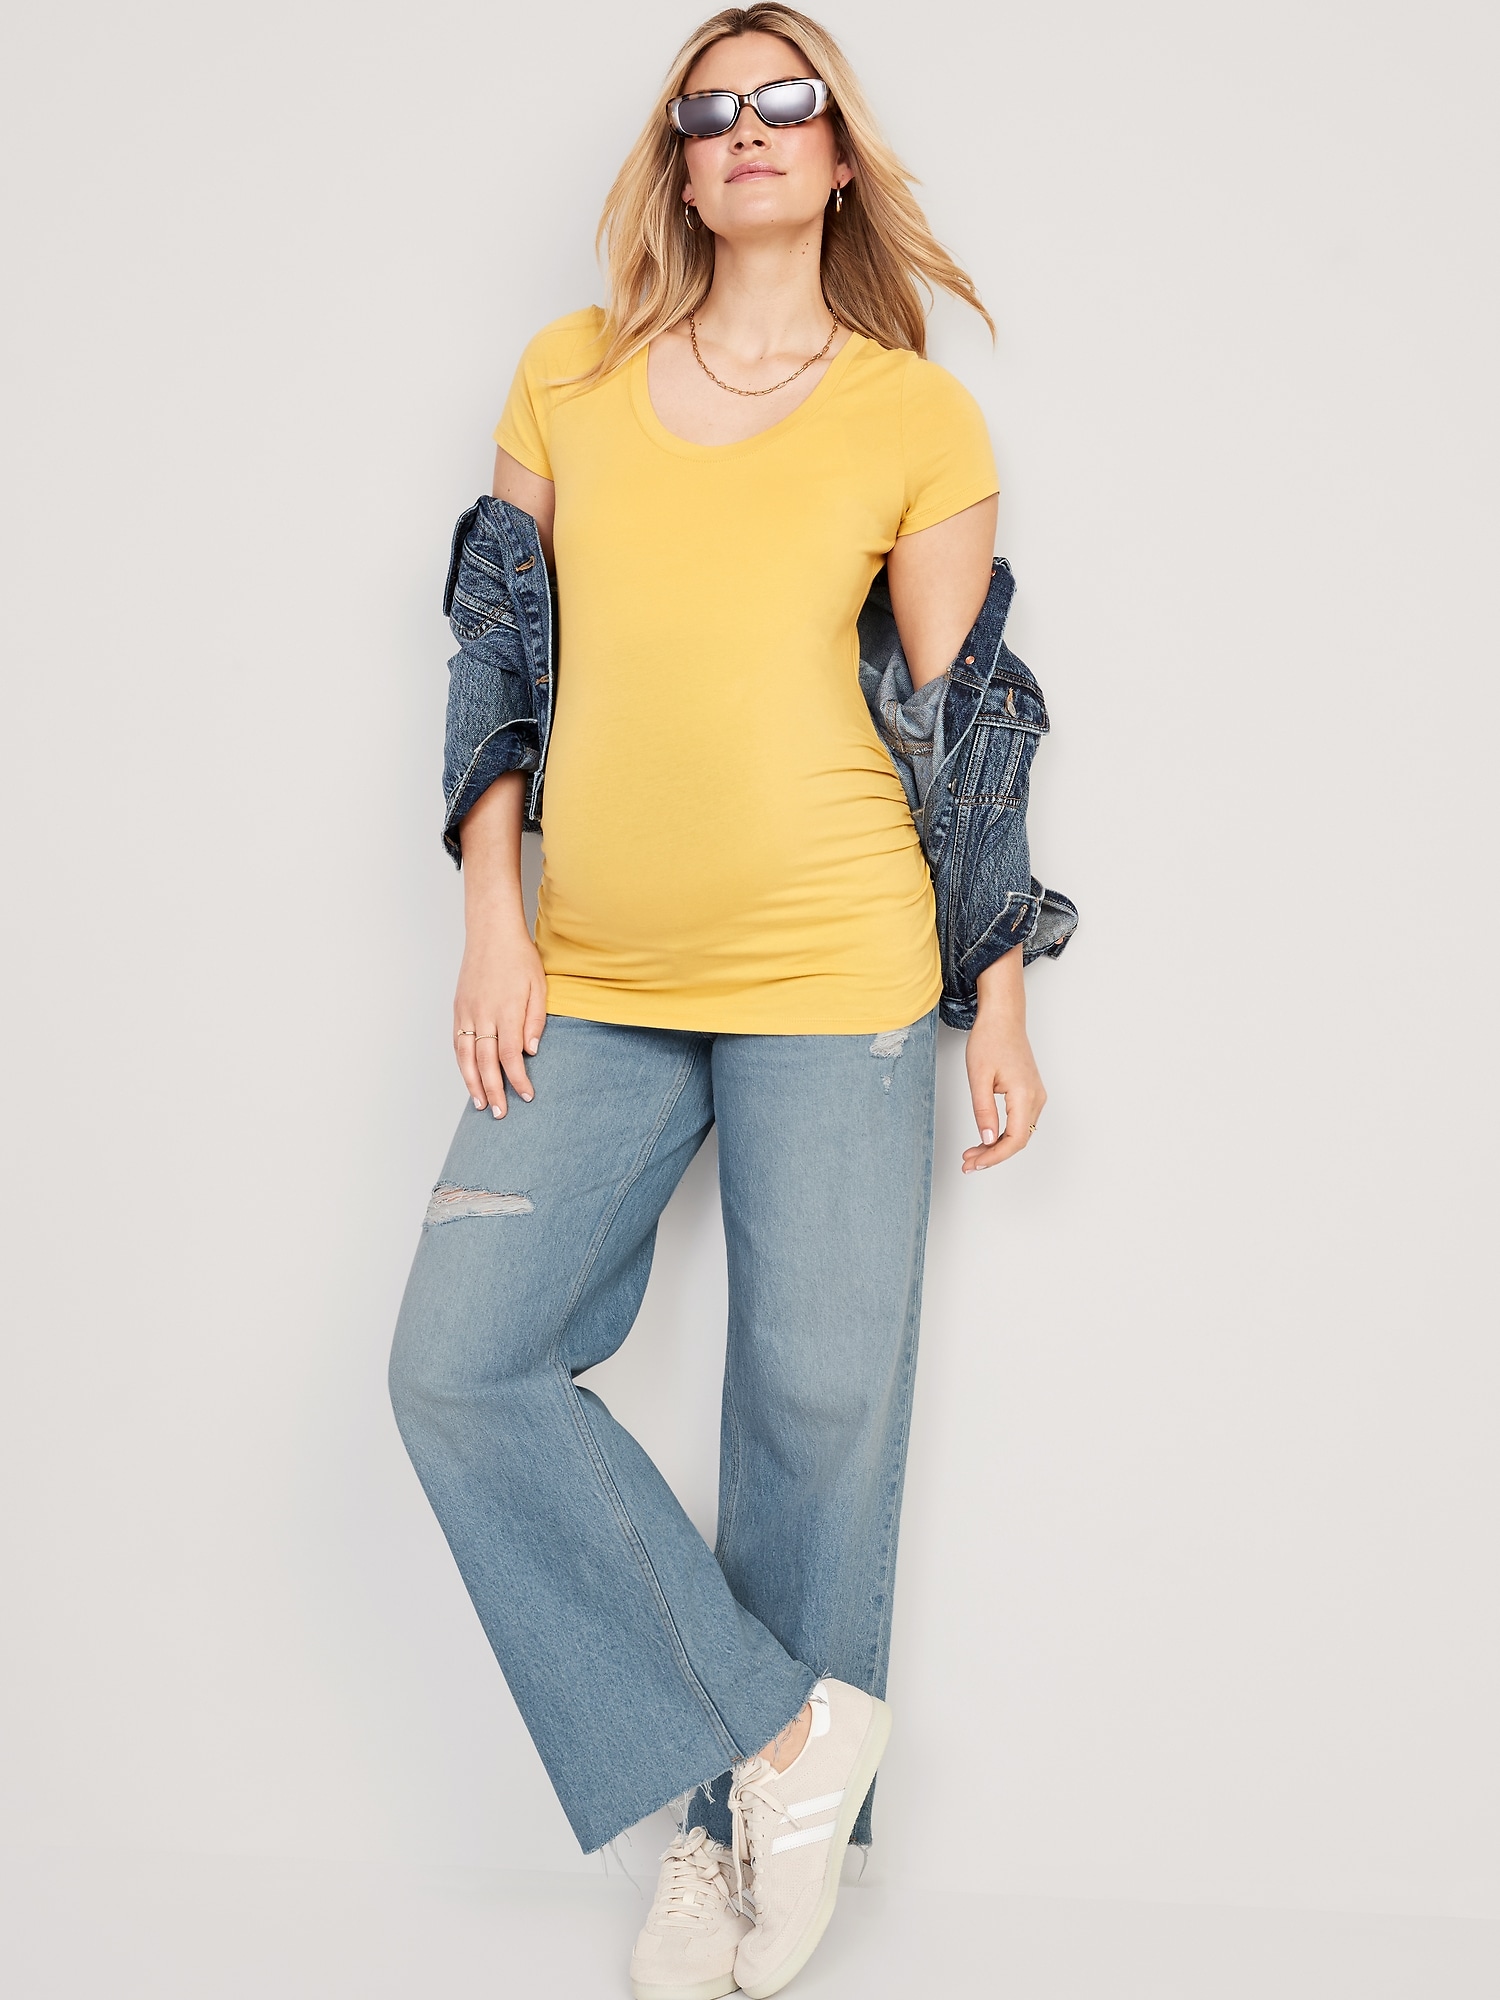 Old Navy Maternity Rollover-Waist Linen-Blend Wide-Leg Pants, 26 Chic Yet  Comfy Old Navy Maternity Pieces to Carry You Through Your Whole Pregnancy